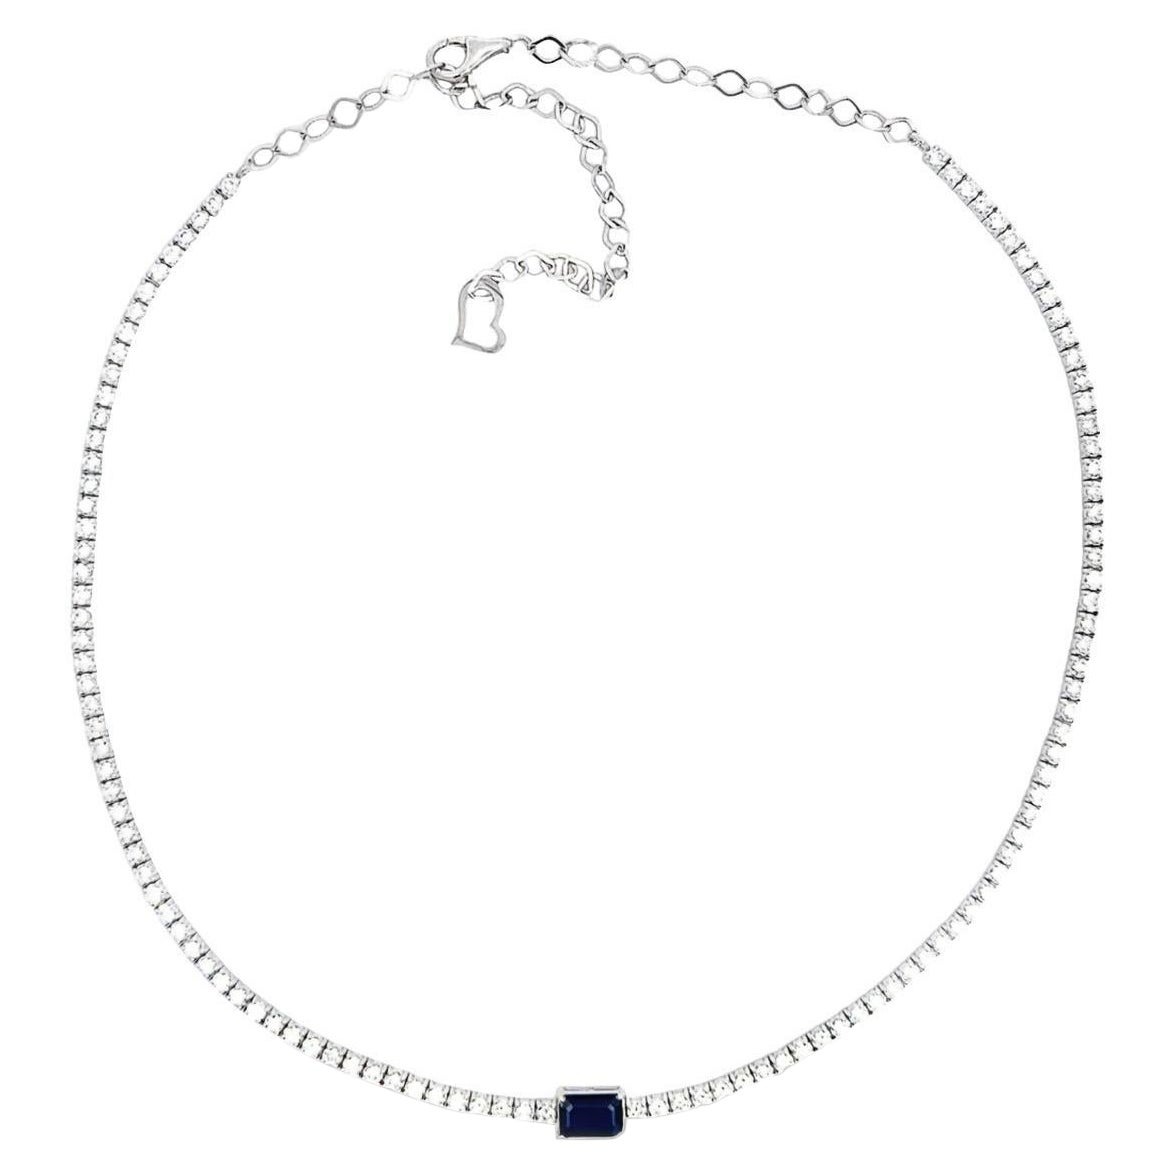 Diamond Choker Necklace in 14k white with 1.02ct of Natural Emerald Cut Sapphire For Sale